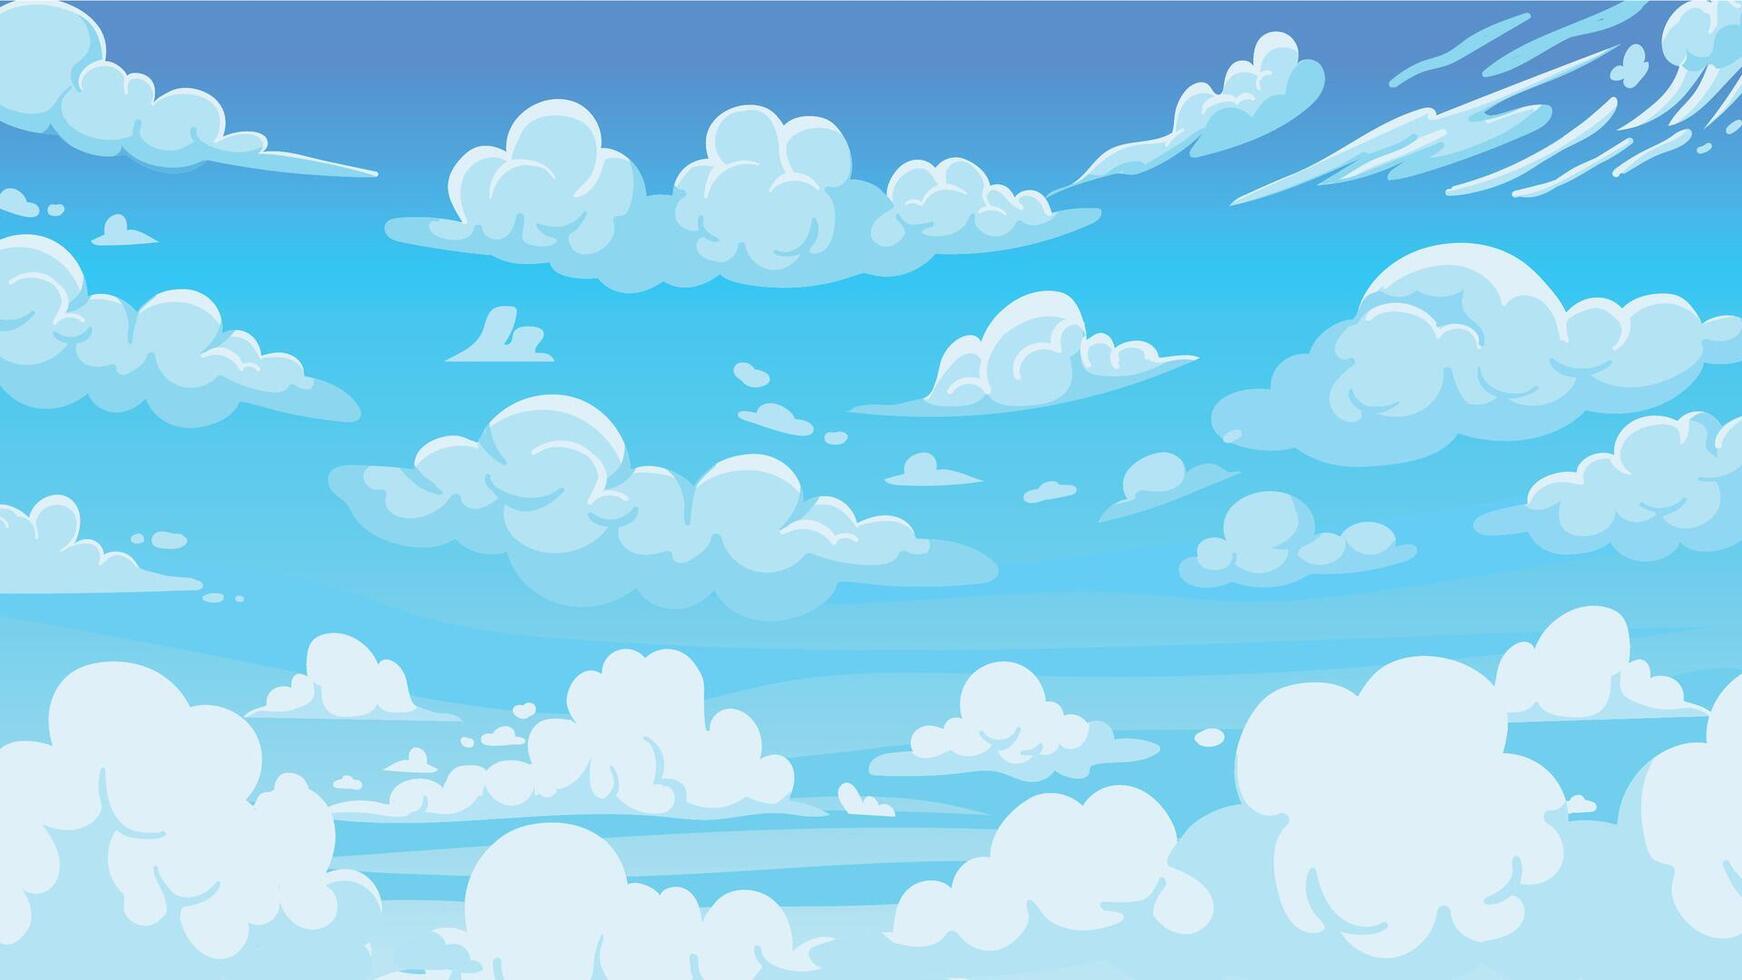 Cloudy sky background. Cartoon atmospheric anime scenery with white clouds and sunny blue summer sky. Vector sunny weather landscape illustration